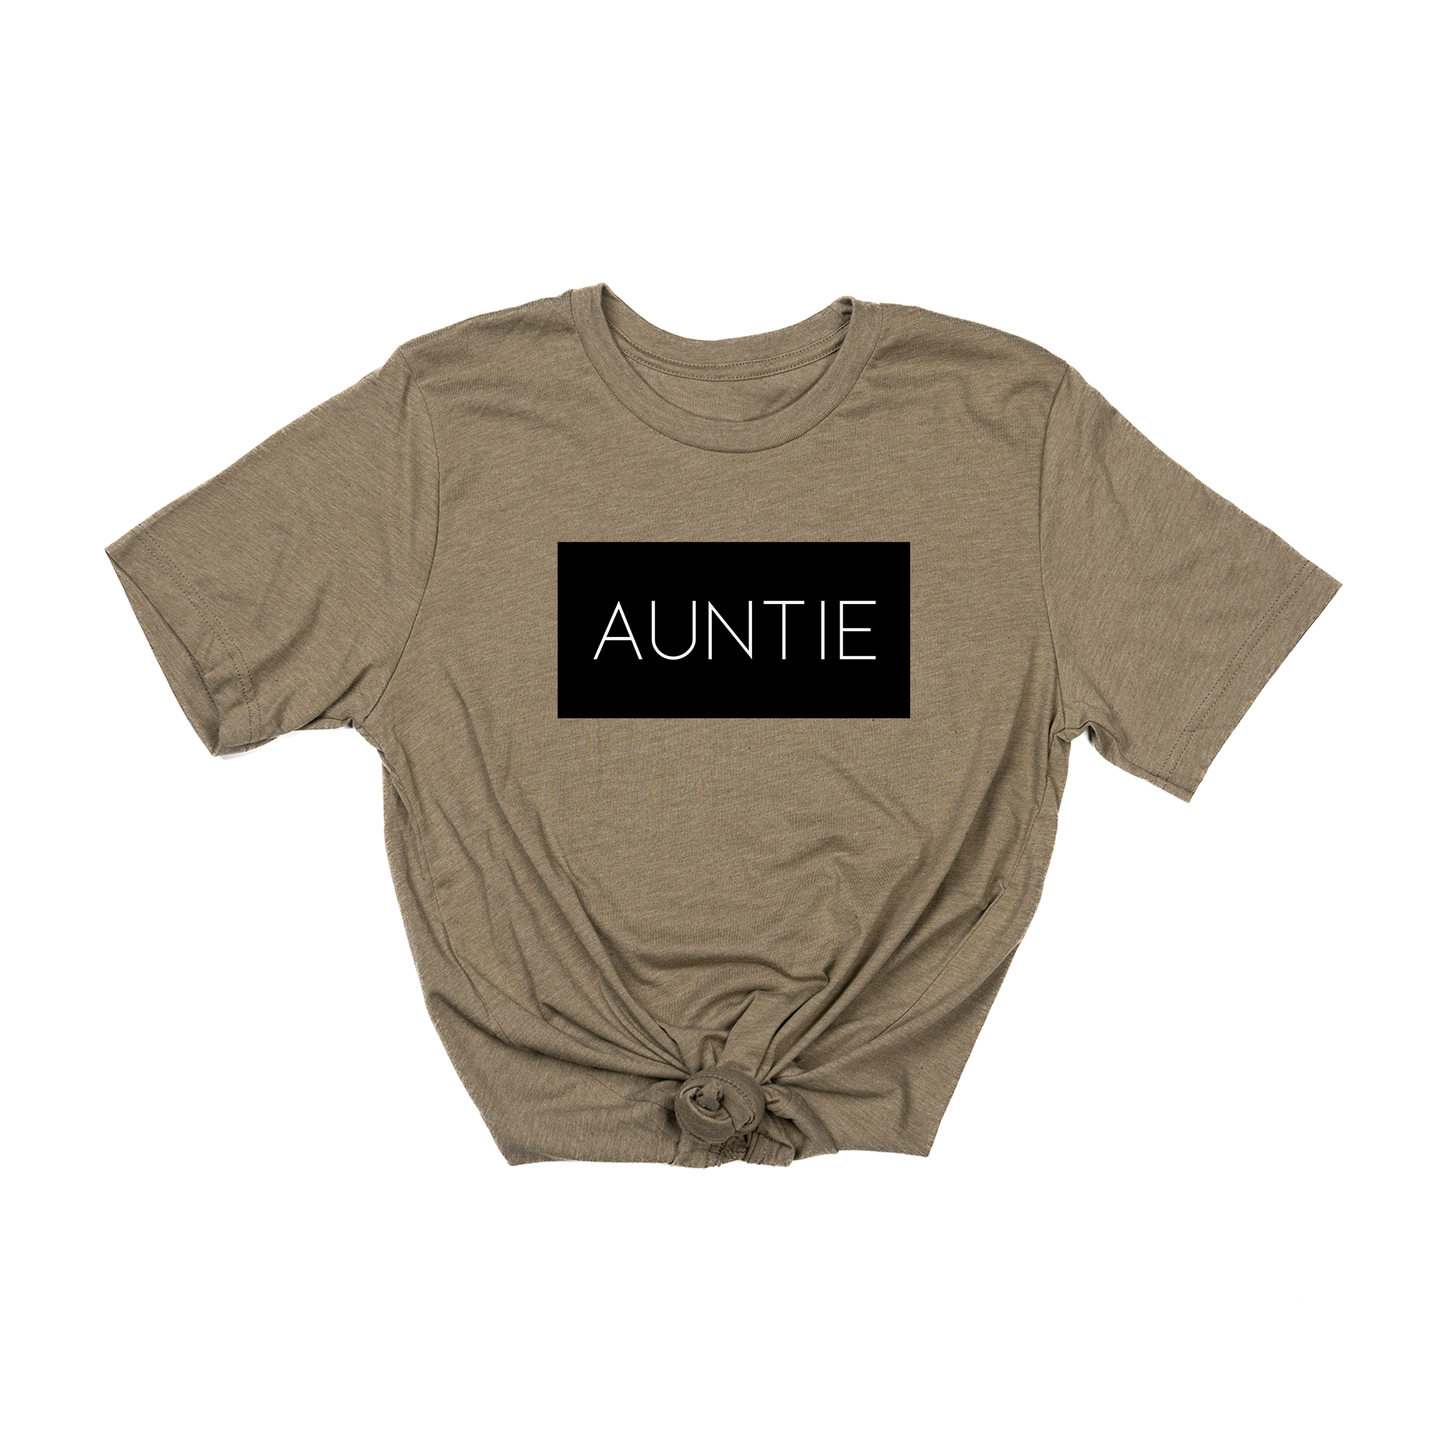 Auntie (Boxed Collection, Black Box/White Text, Across Front) - Tee (Olive)